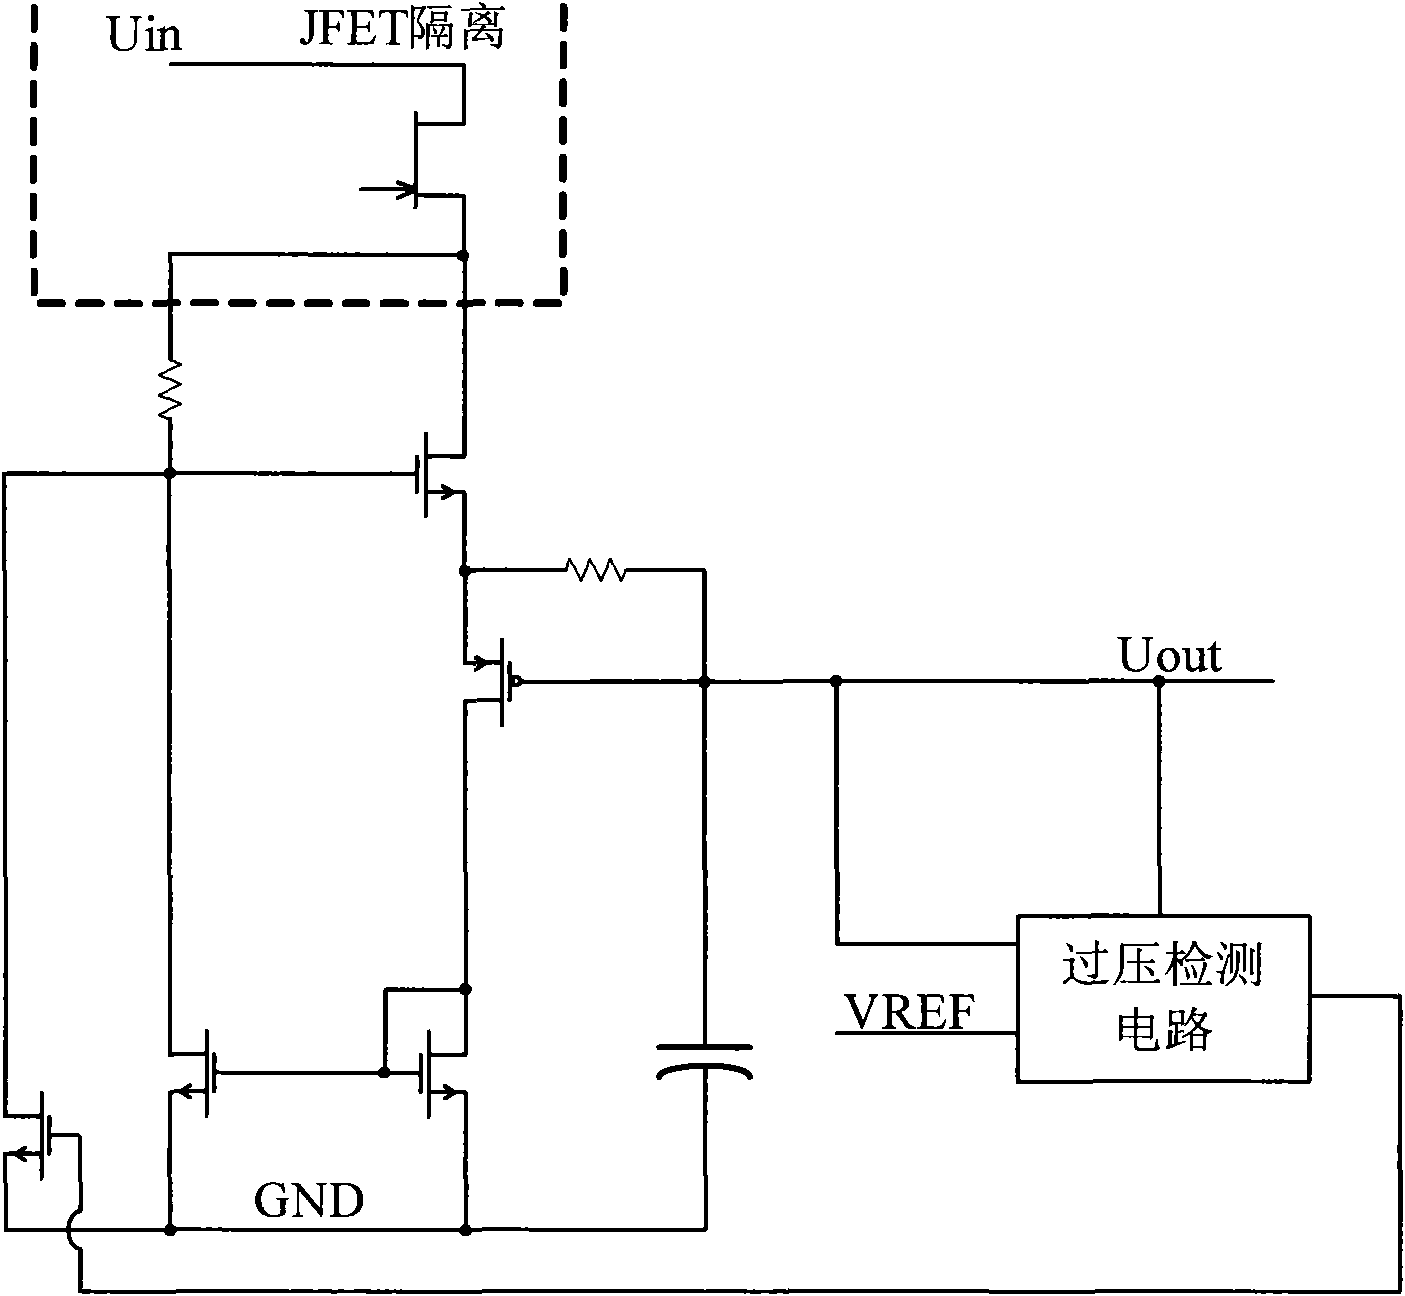 Internal power supply circuit started with high voltage and constant current